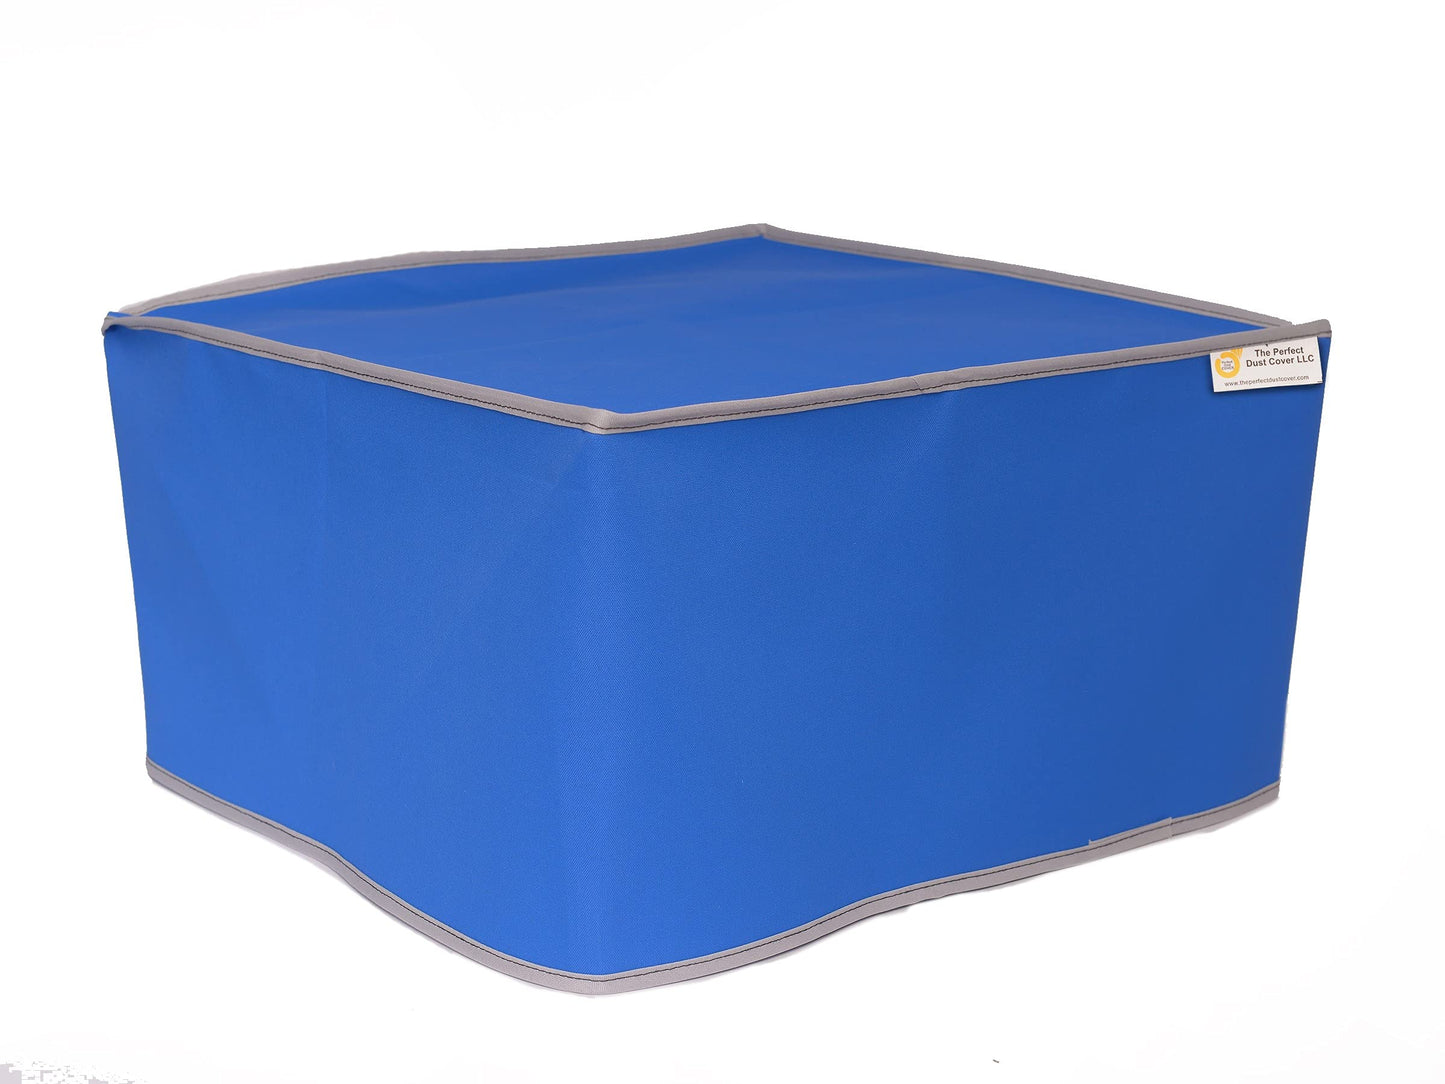 The Perfect Dust Cover, Royal Blue Nylon Cover Compatible with HP Color Laserjet Enterprise M553dn Printer, Anti Static and Waterproof Dust Cover by The Perfect Dust Cover LLC